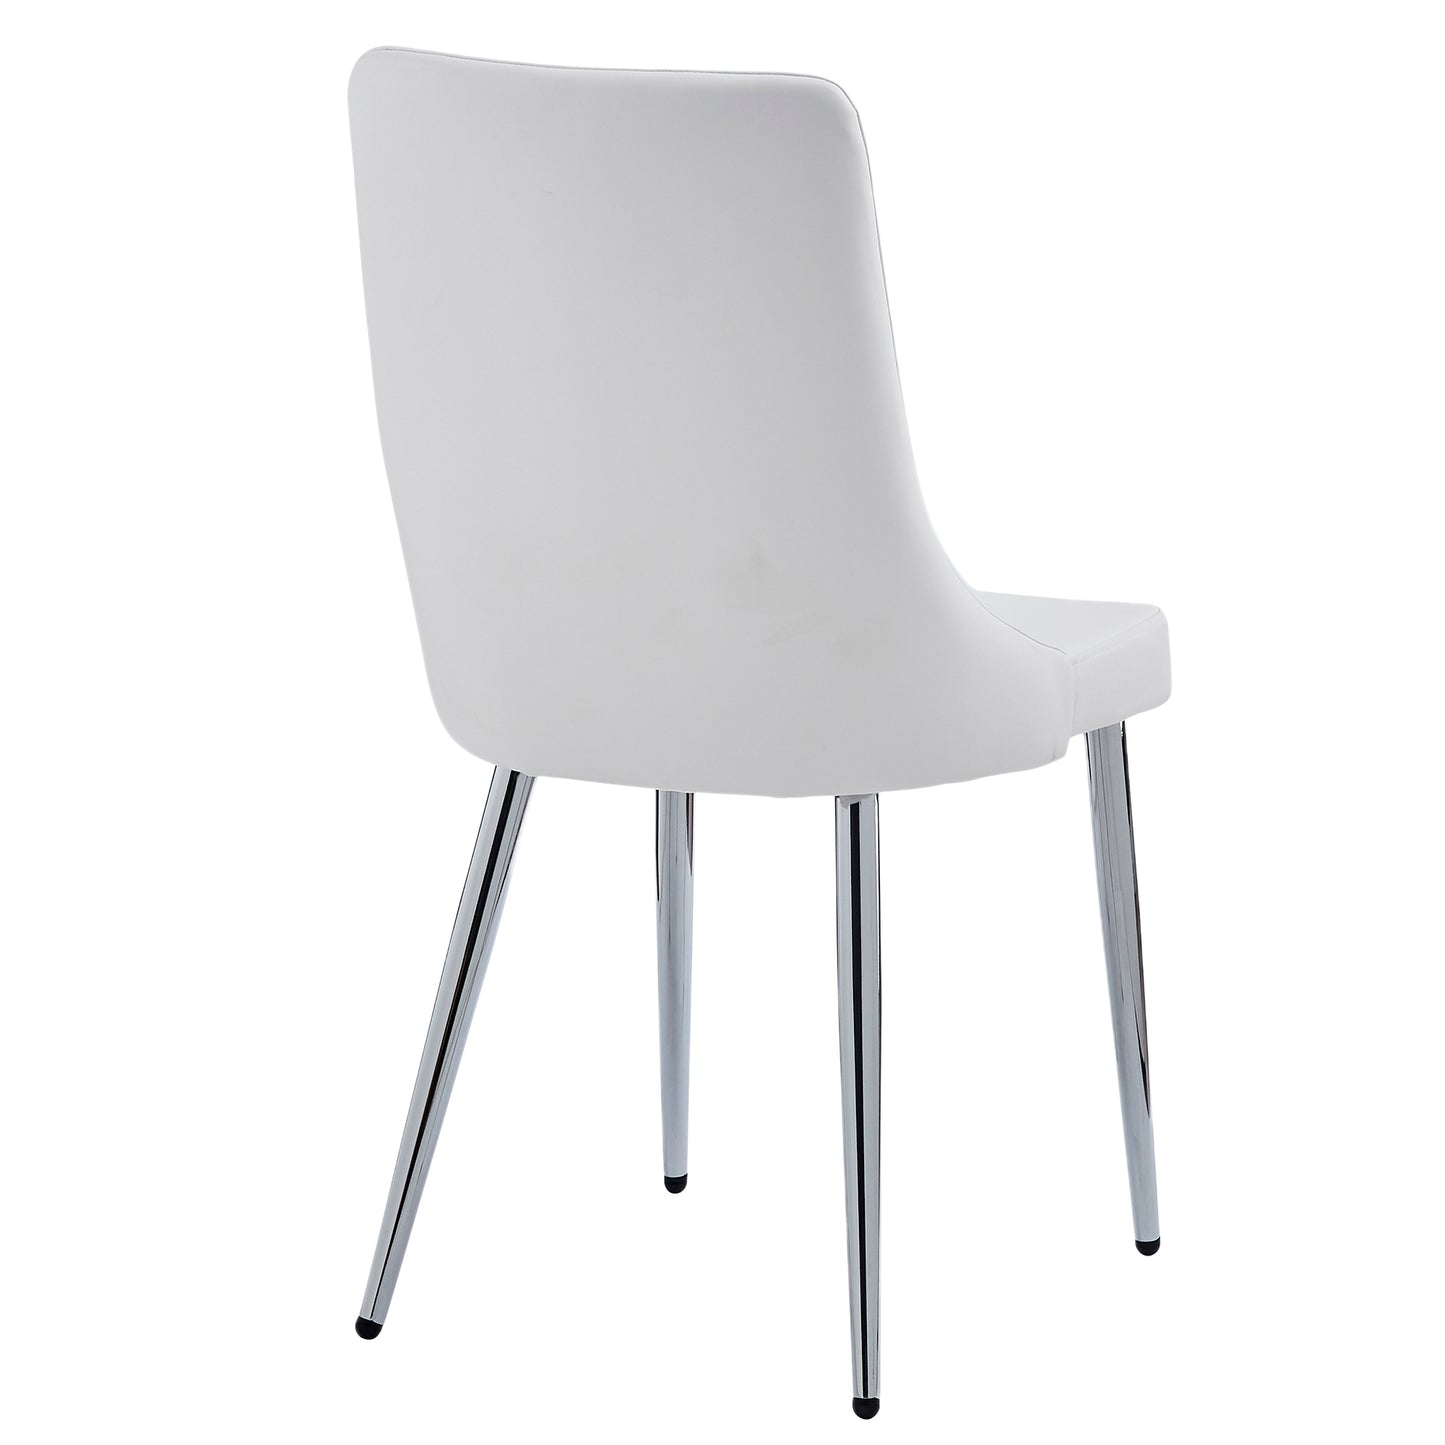 Devo Side Chair, Set of 2 in White and Chrome